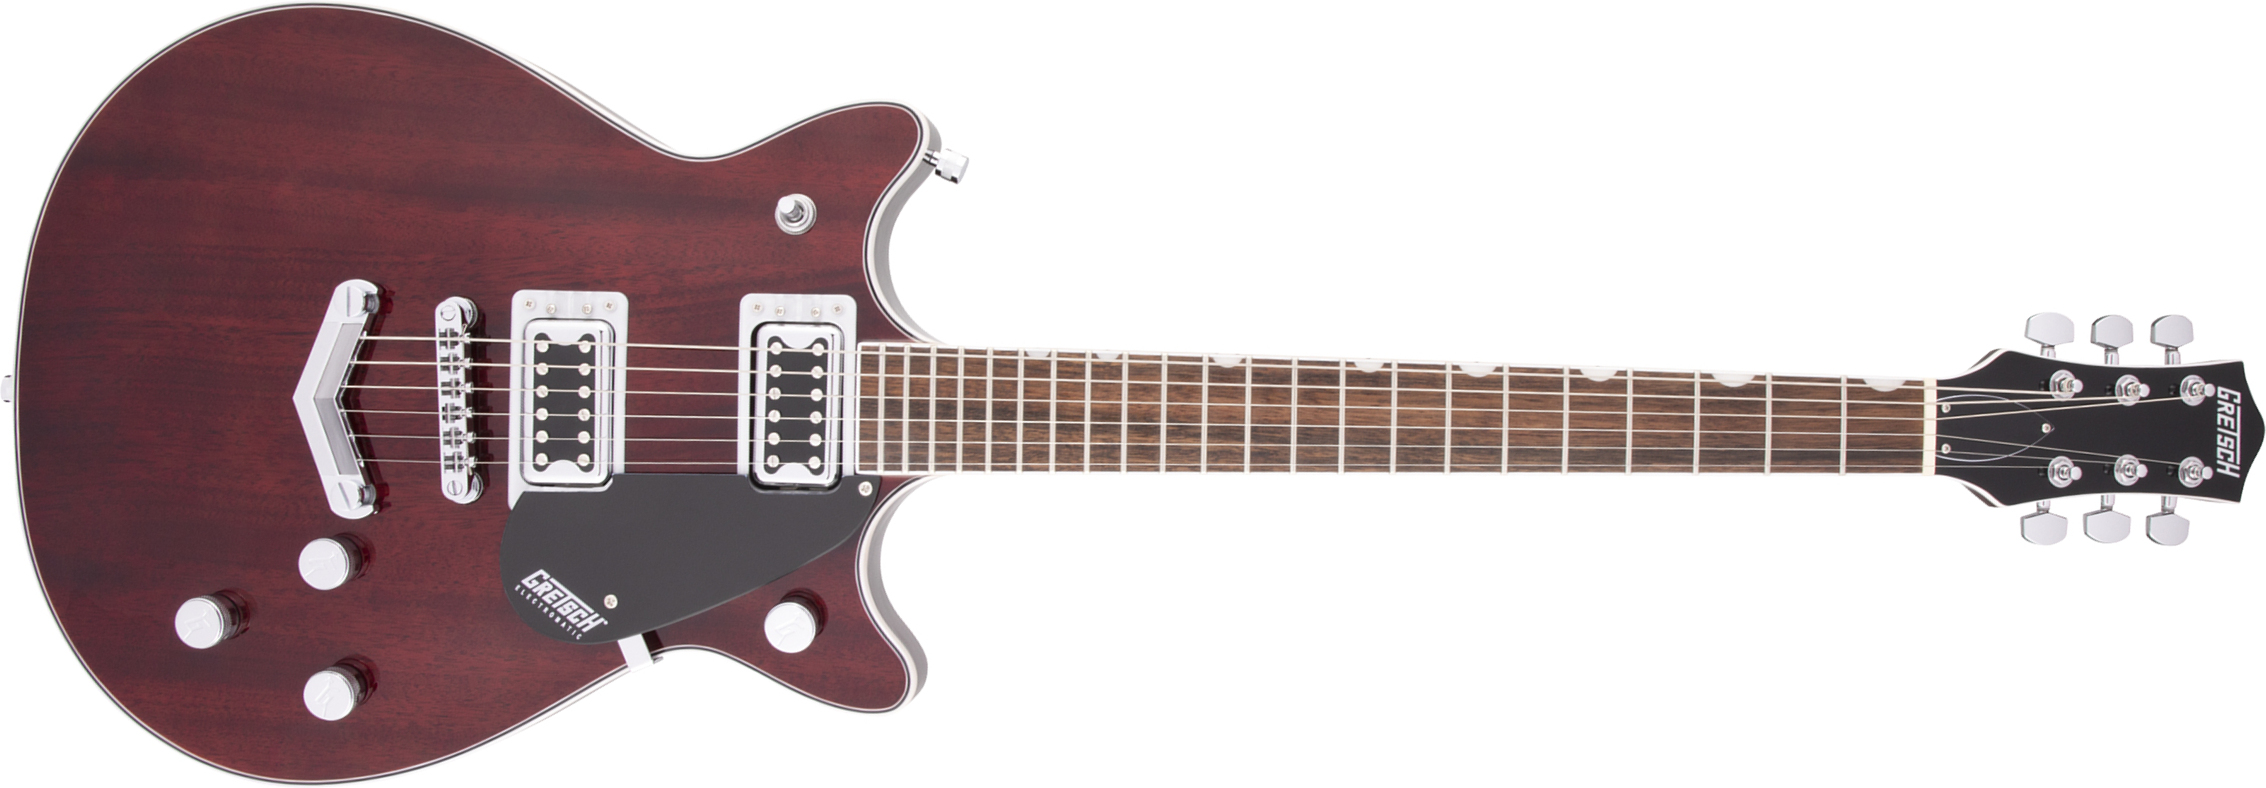 Gretsch G5222 Electromatic Double Jet Bt V-stoptail Hh Ht Lau - Walnut Stain - Double cut electric guitar - Main picture